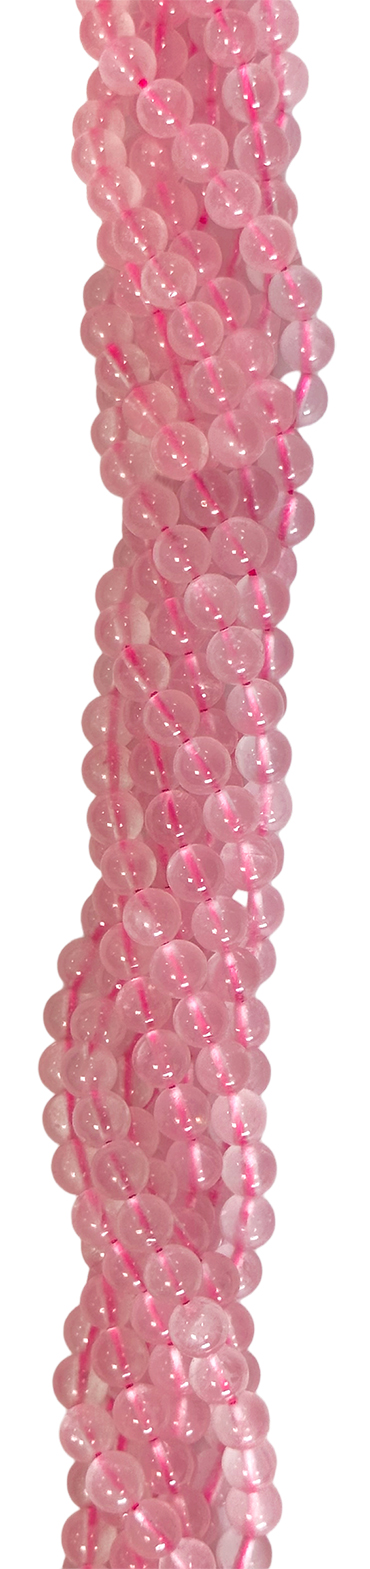 Rosequartz A 8mm pearls on string